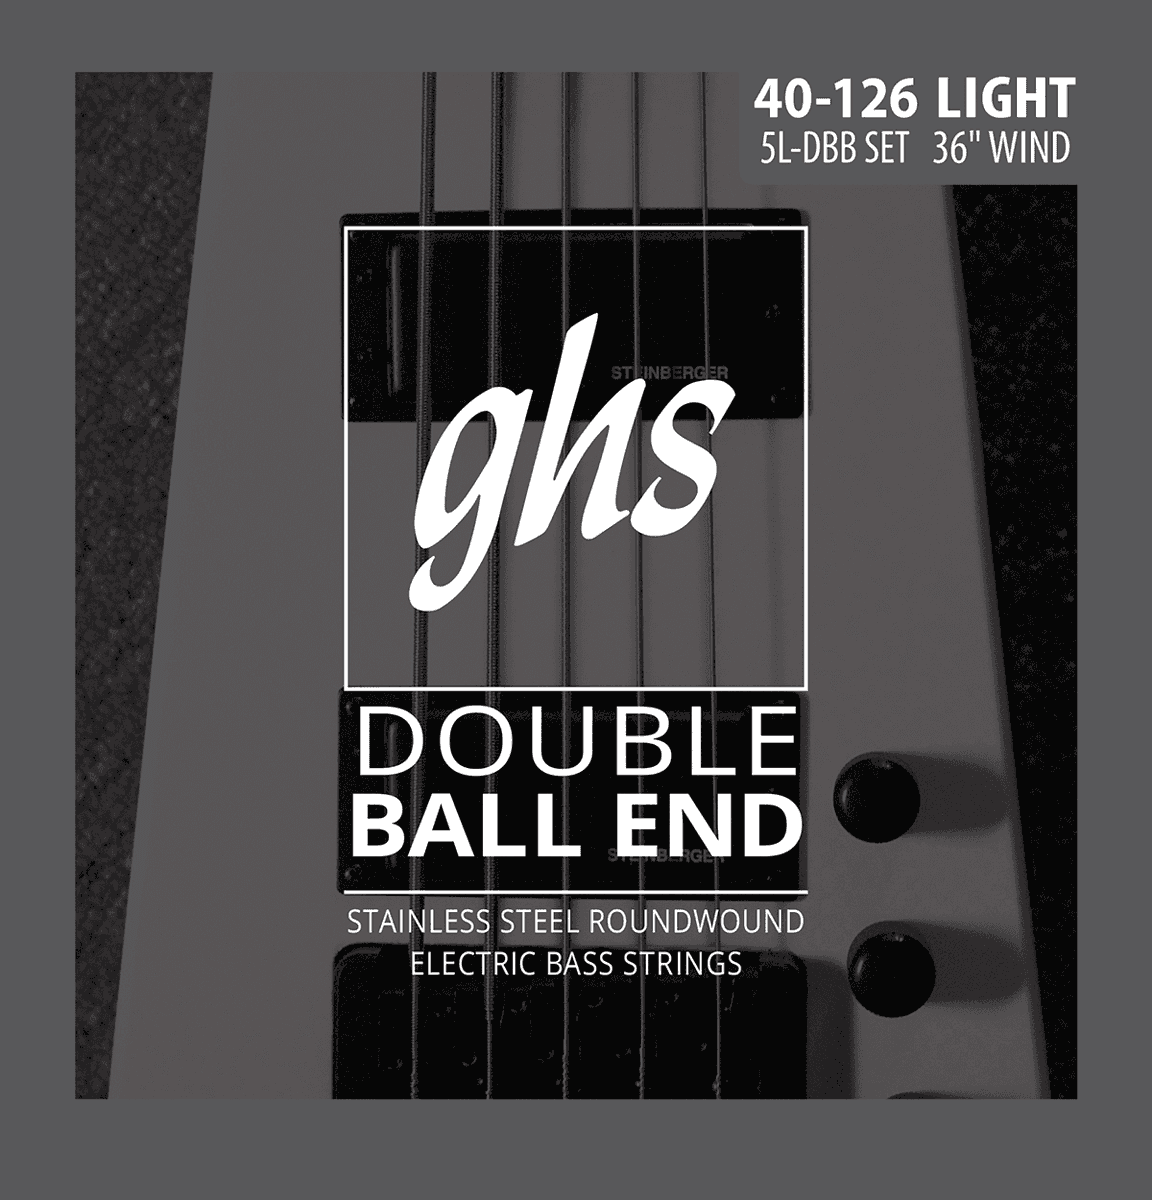 DOUBLE BALL END - Light, 5 String (36